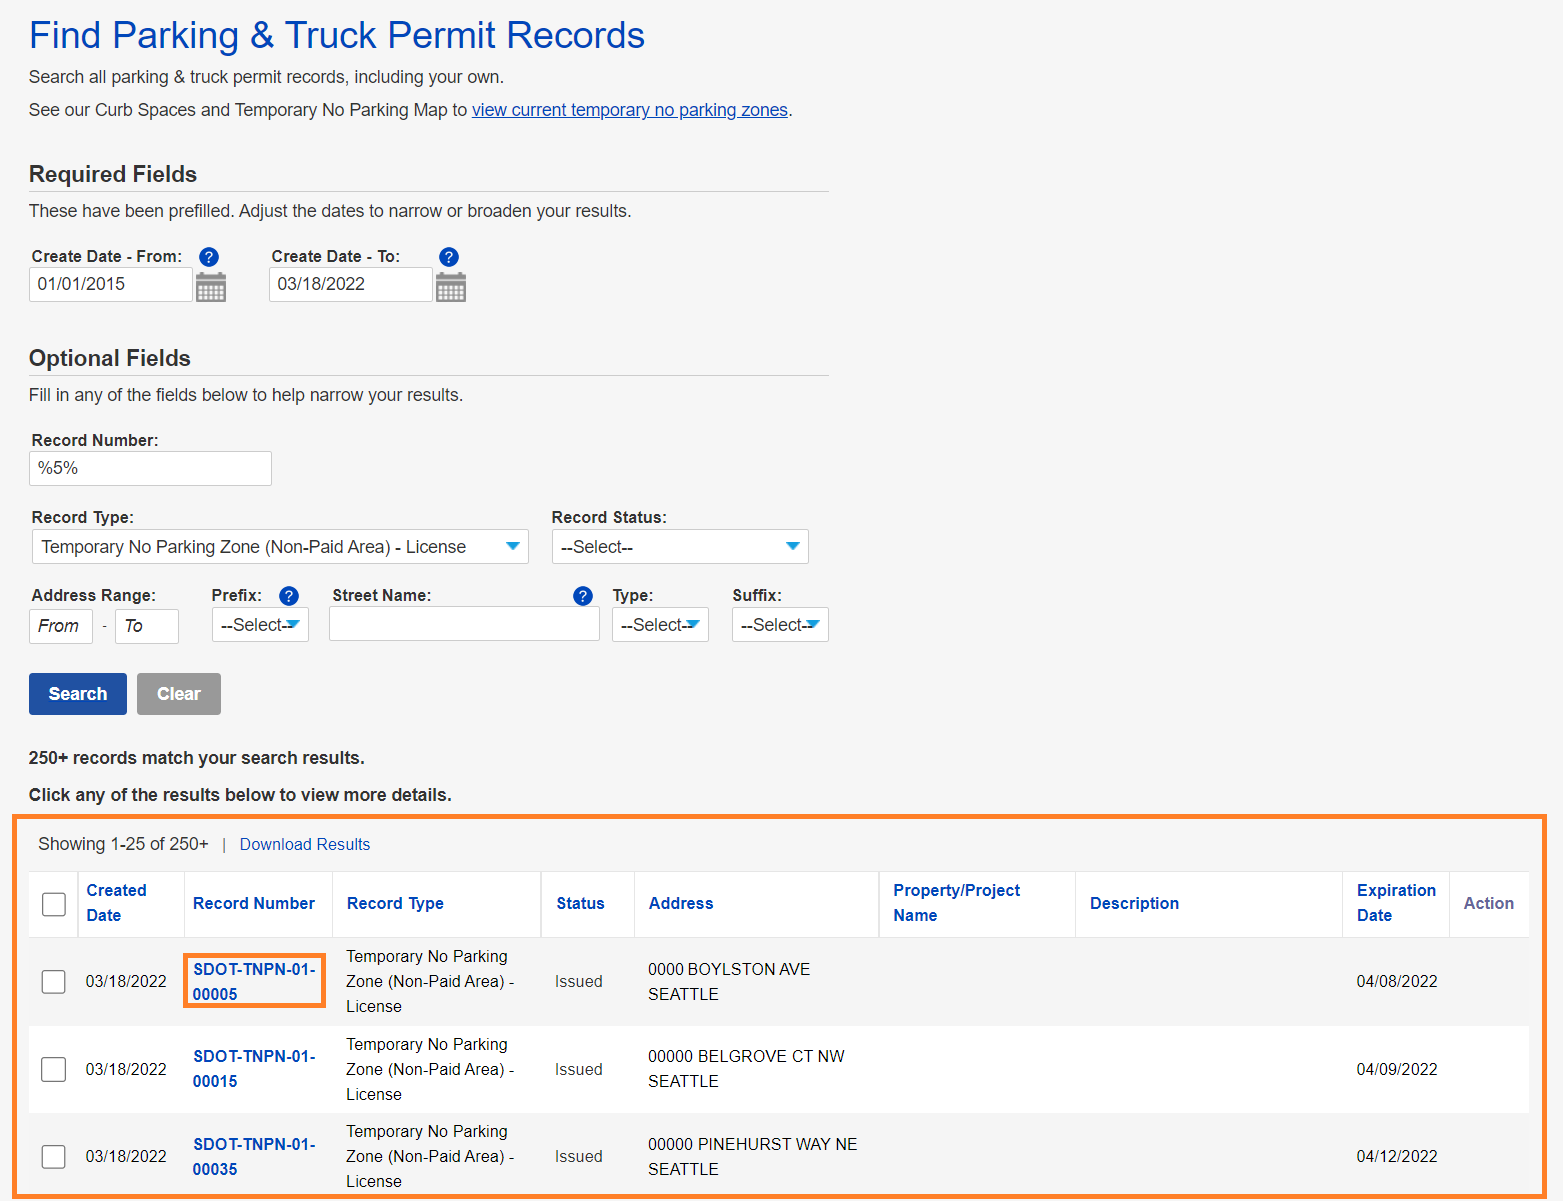 Find_Parking___Truck_Multiple_Records_Returned_Record_Highlighted.png